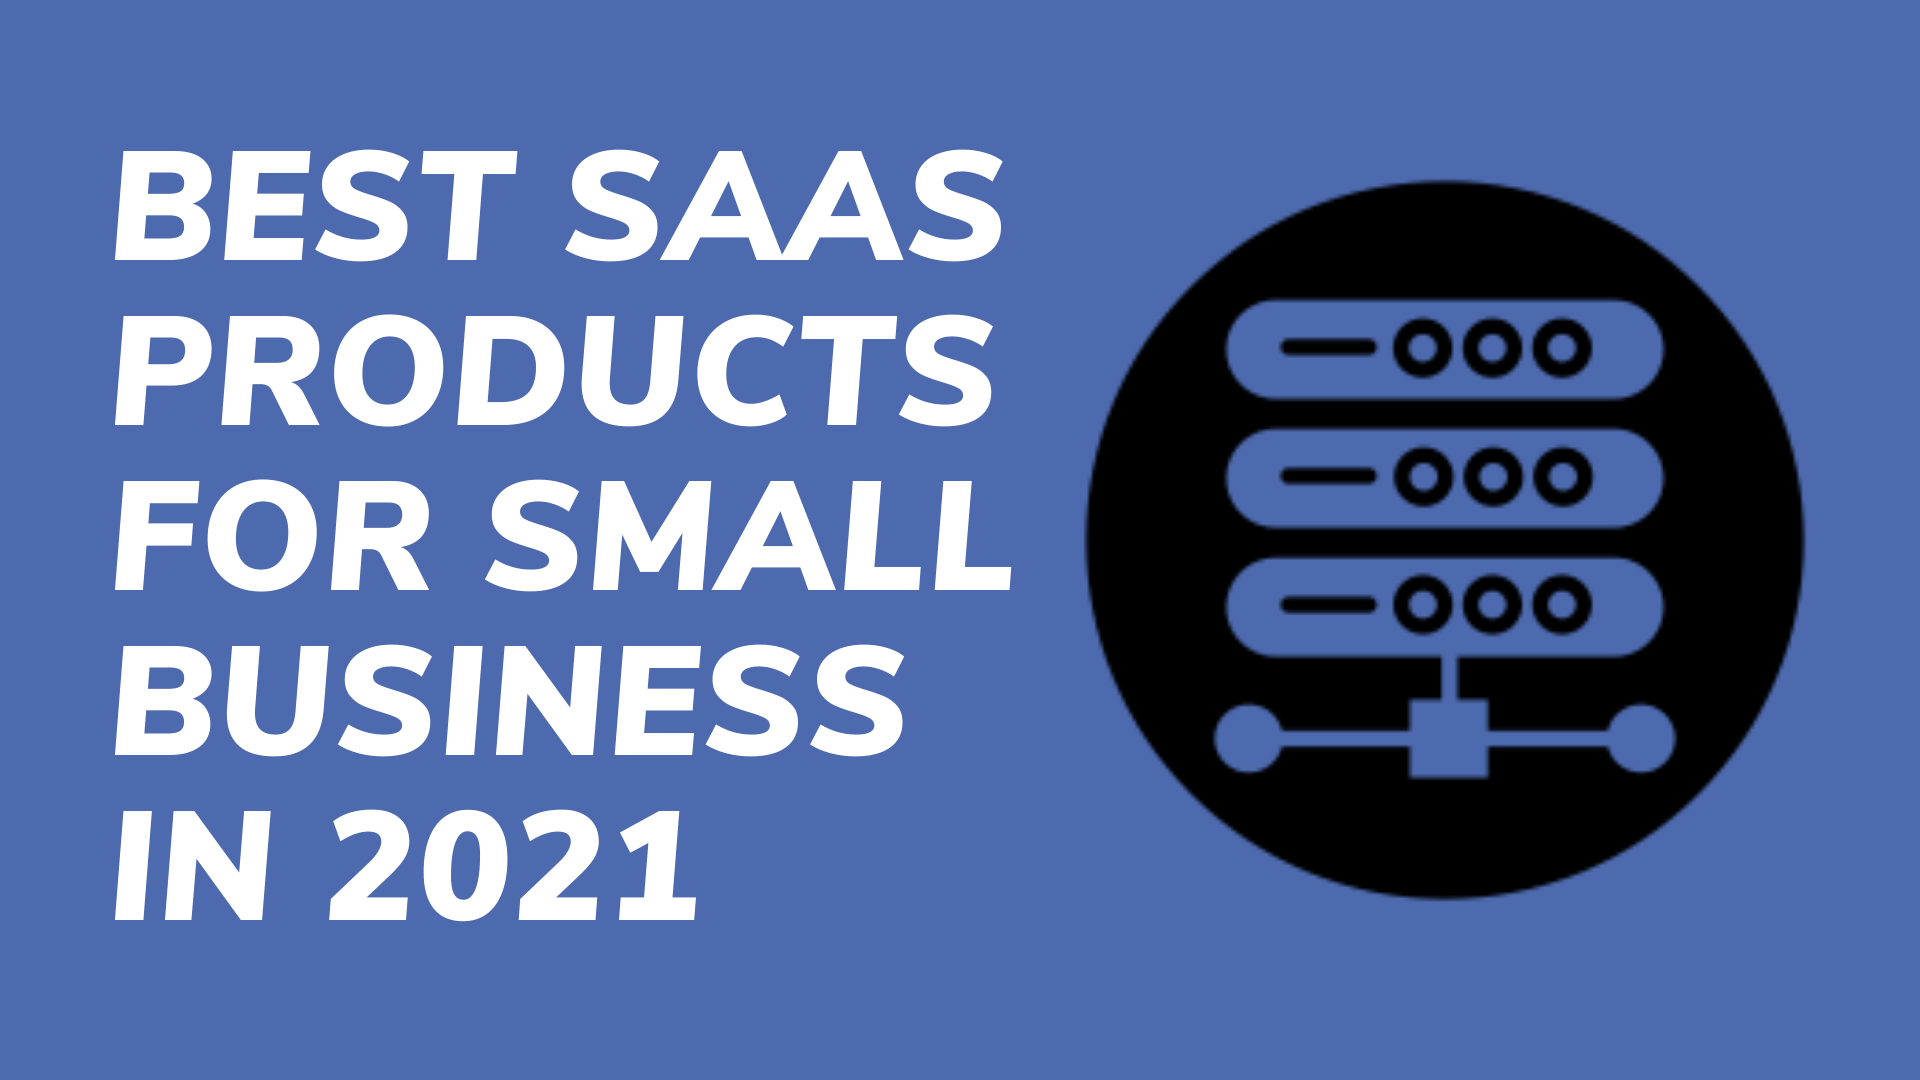 Best-Saas-Products-For-Small-Business-in-2021-1-2